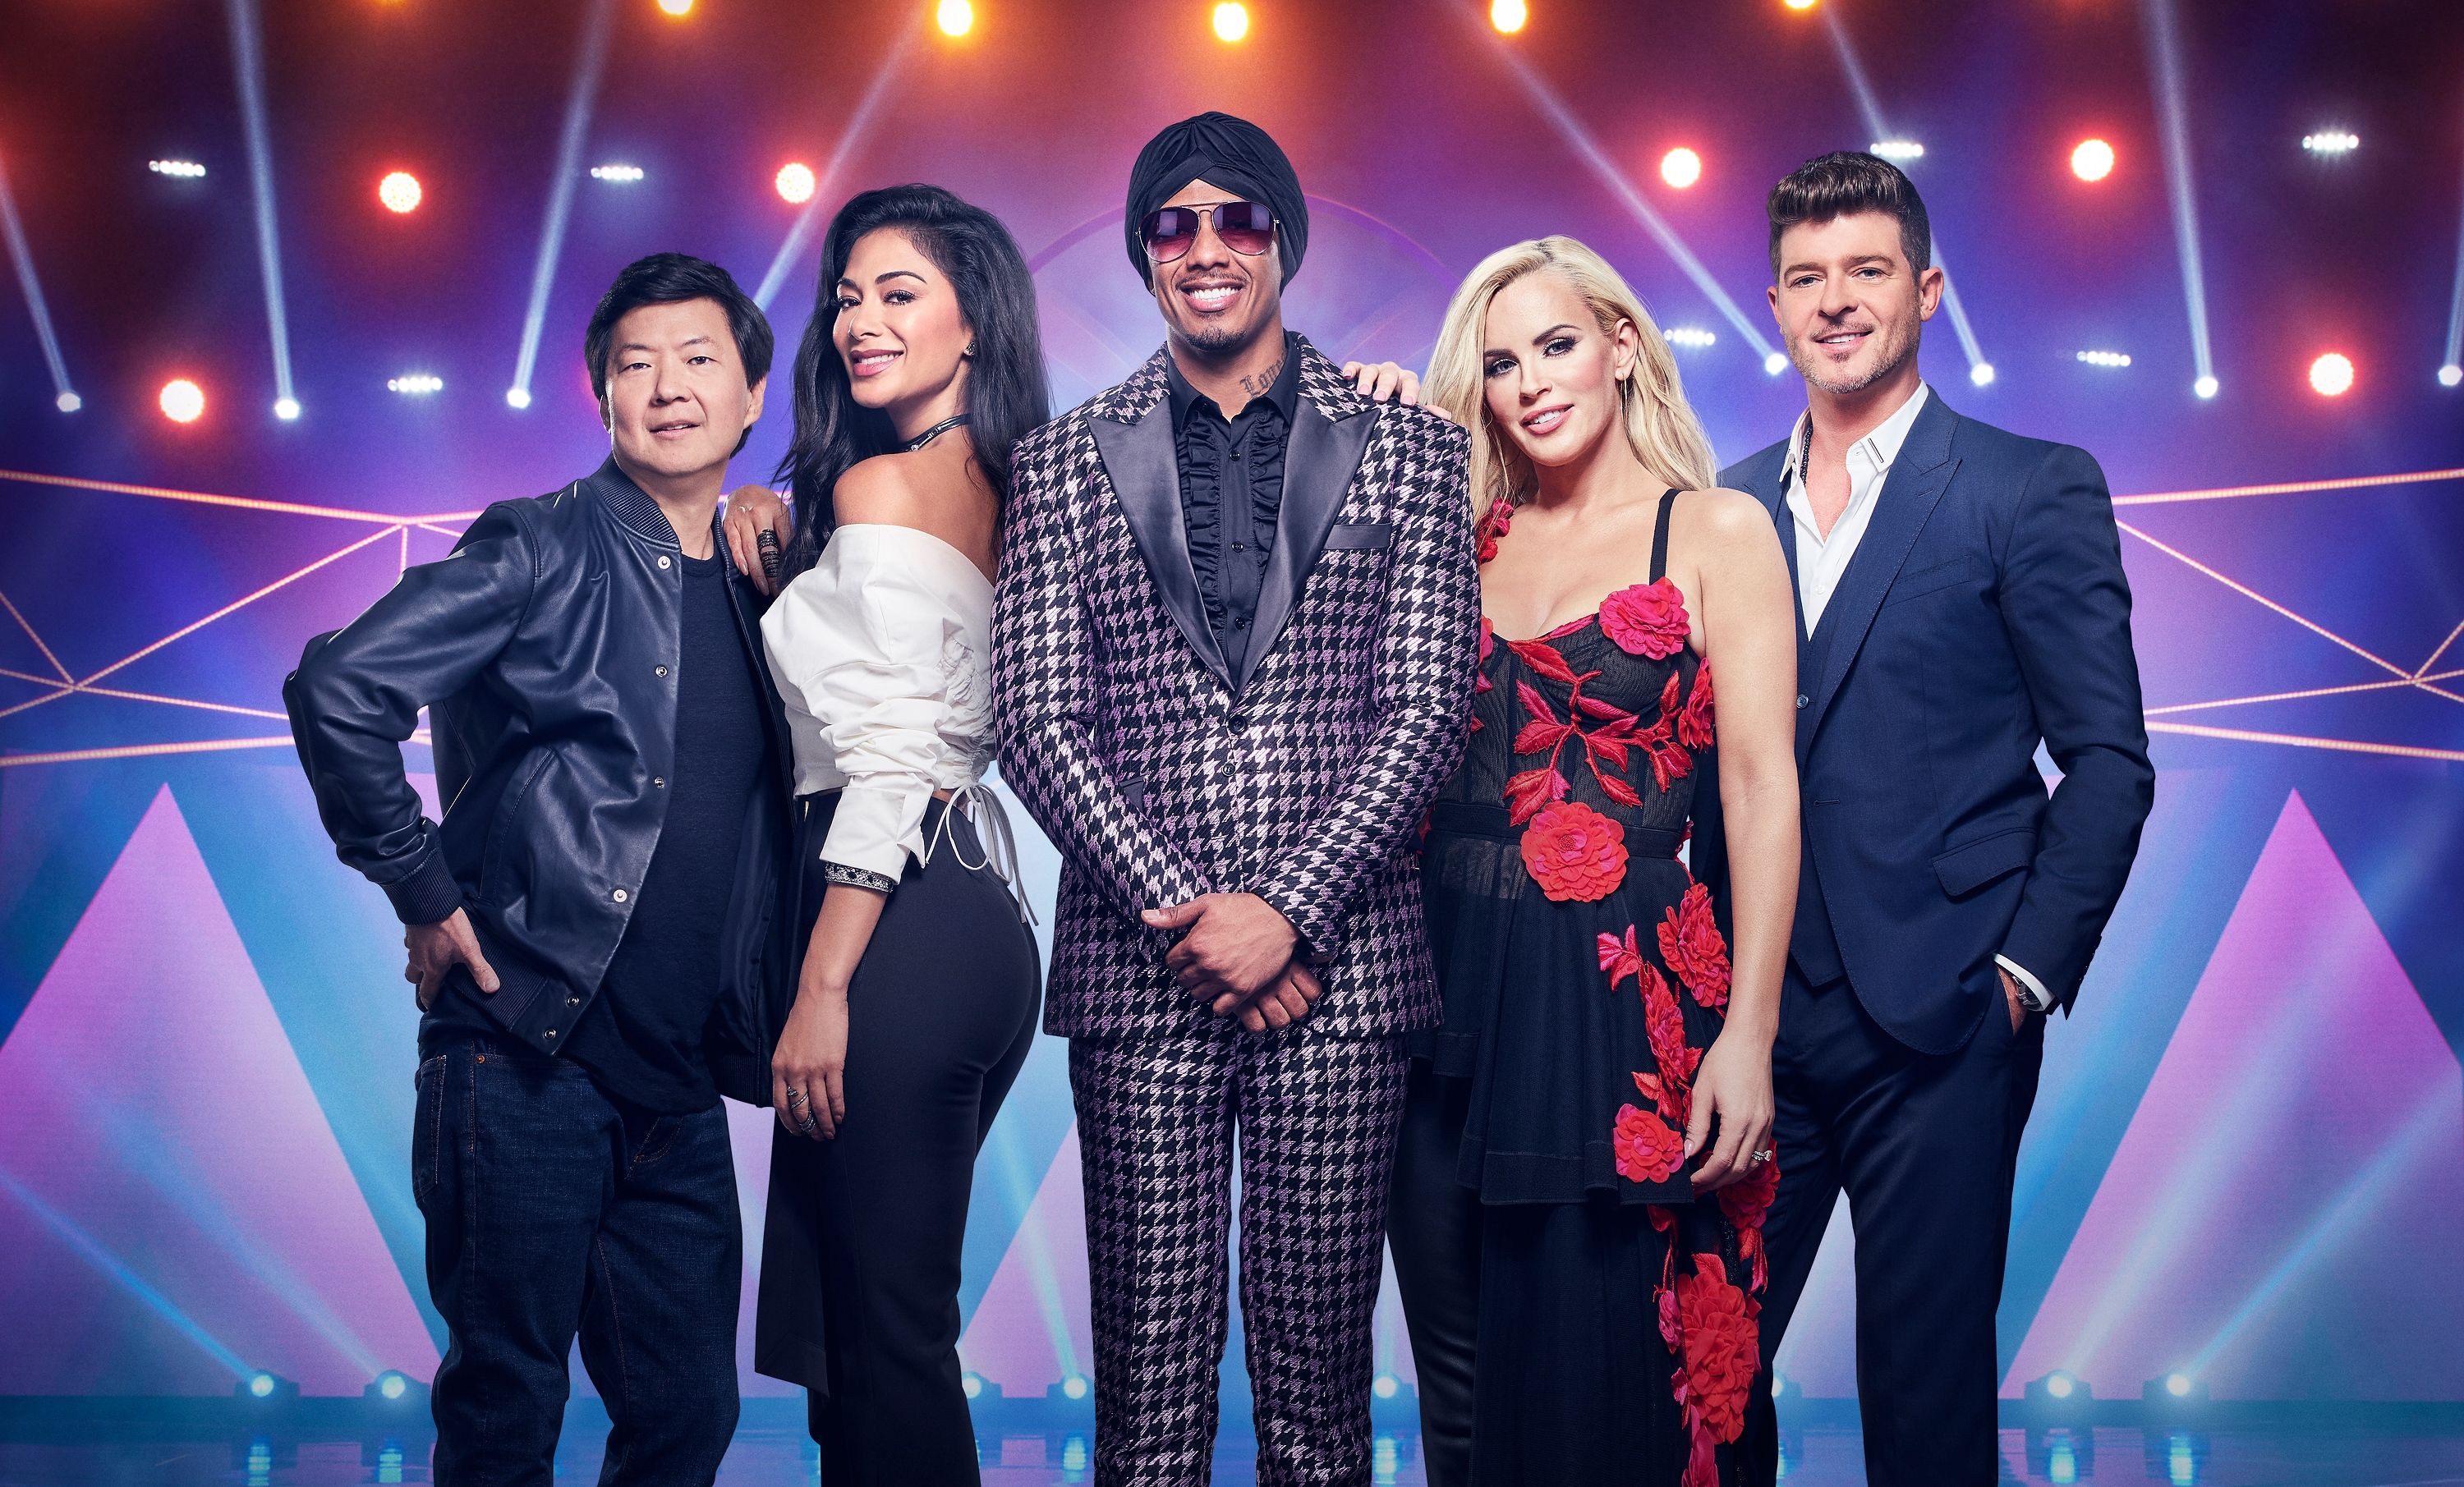 Ken Jeong, Nicole Scherzinger, Nick Cannon, Jenny McCarthy, and Robin Thicke in "The Masked Singer" on June 13, 2018 | Photo: Getty Images